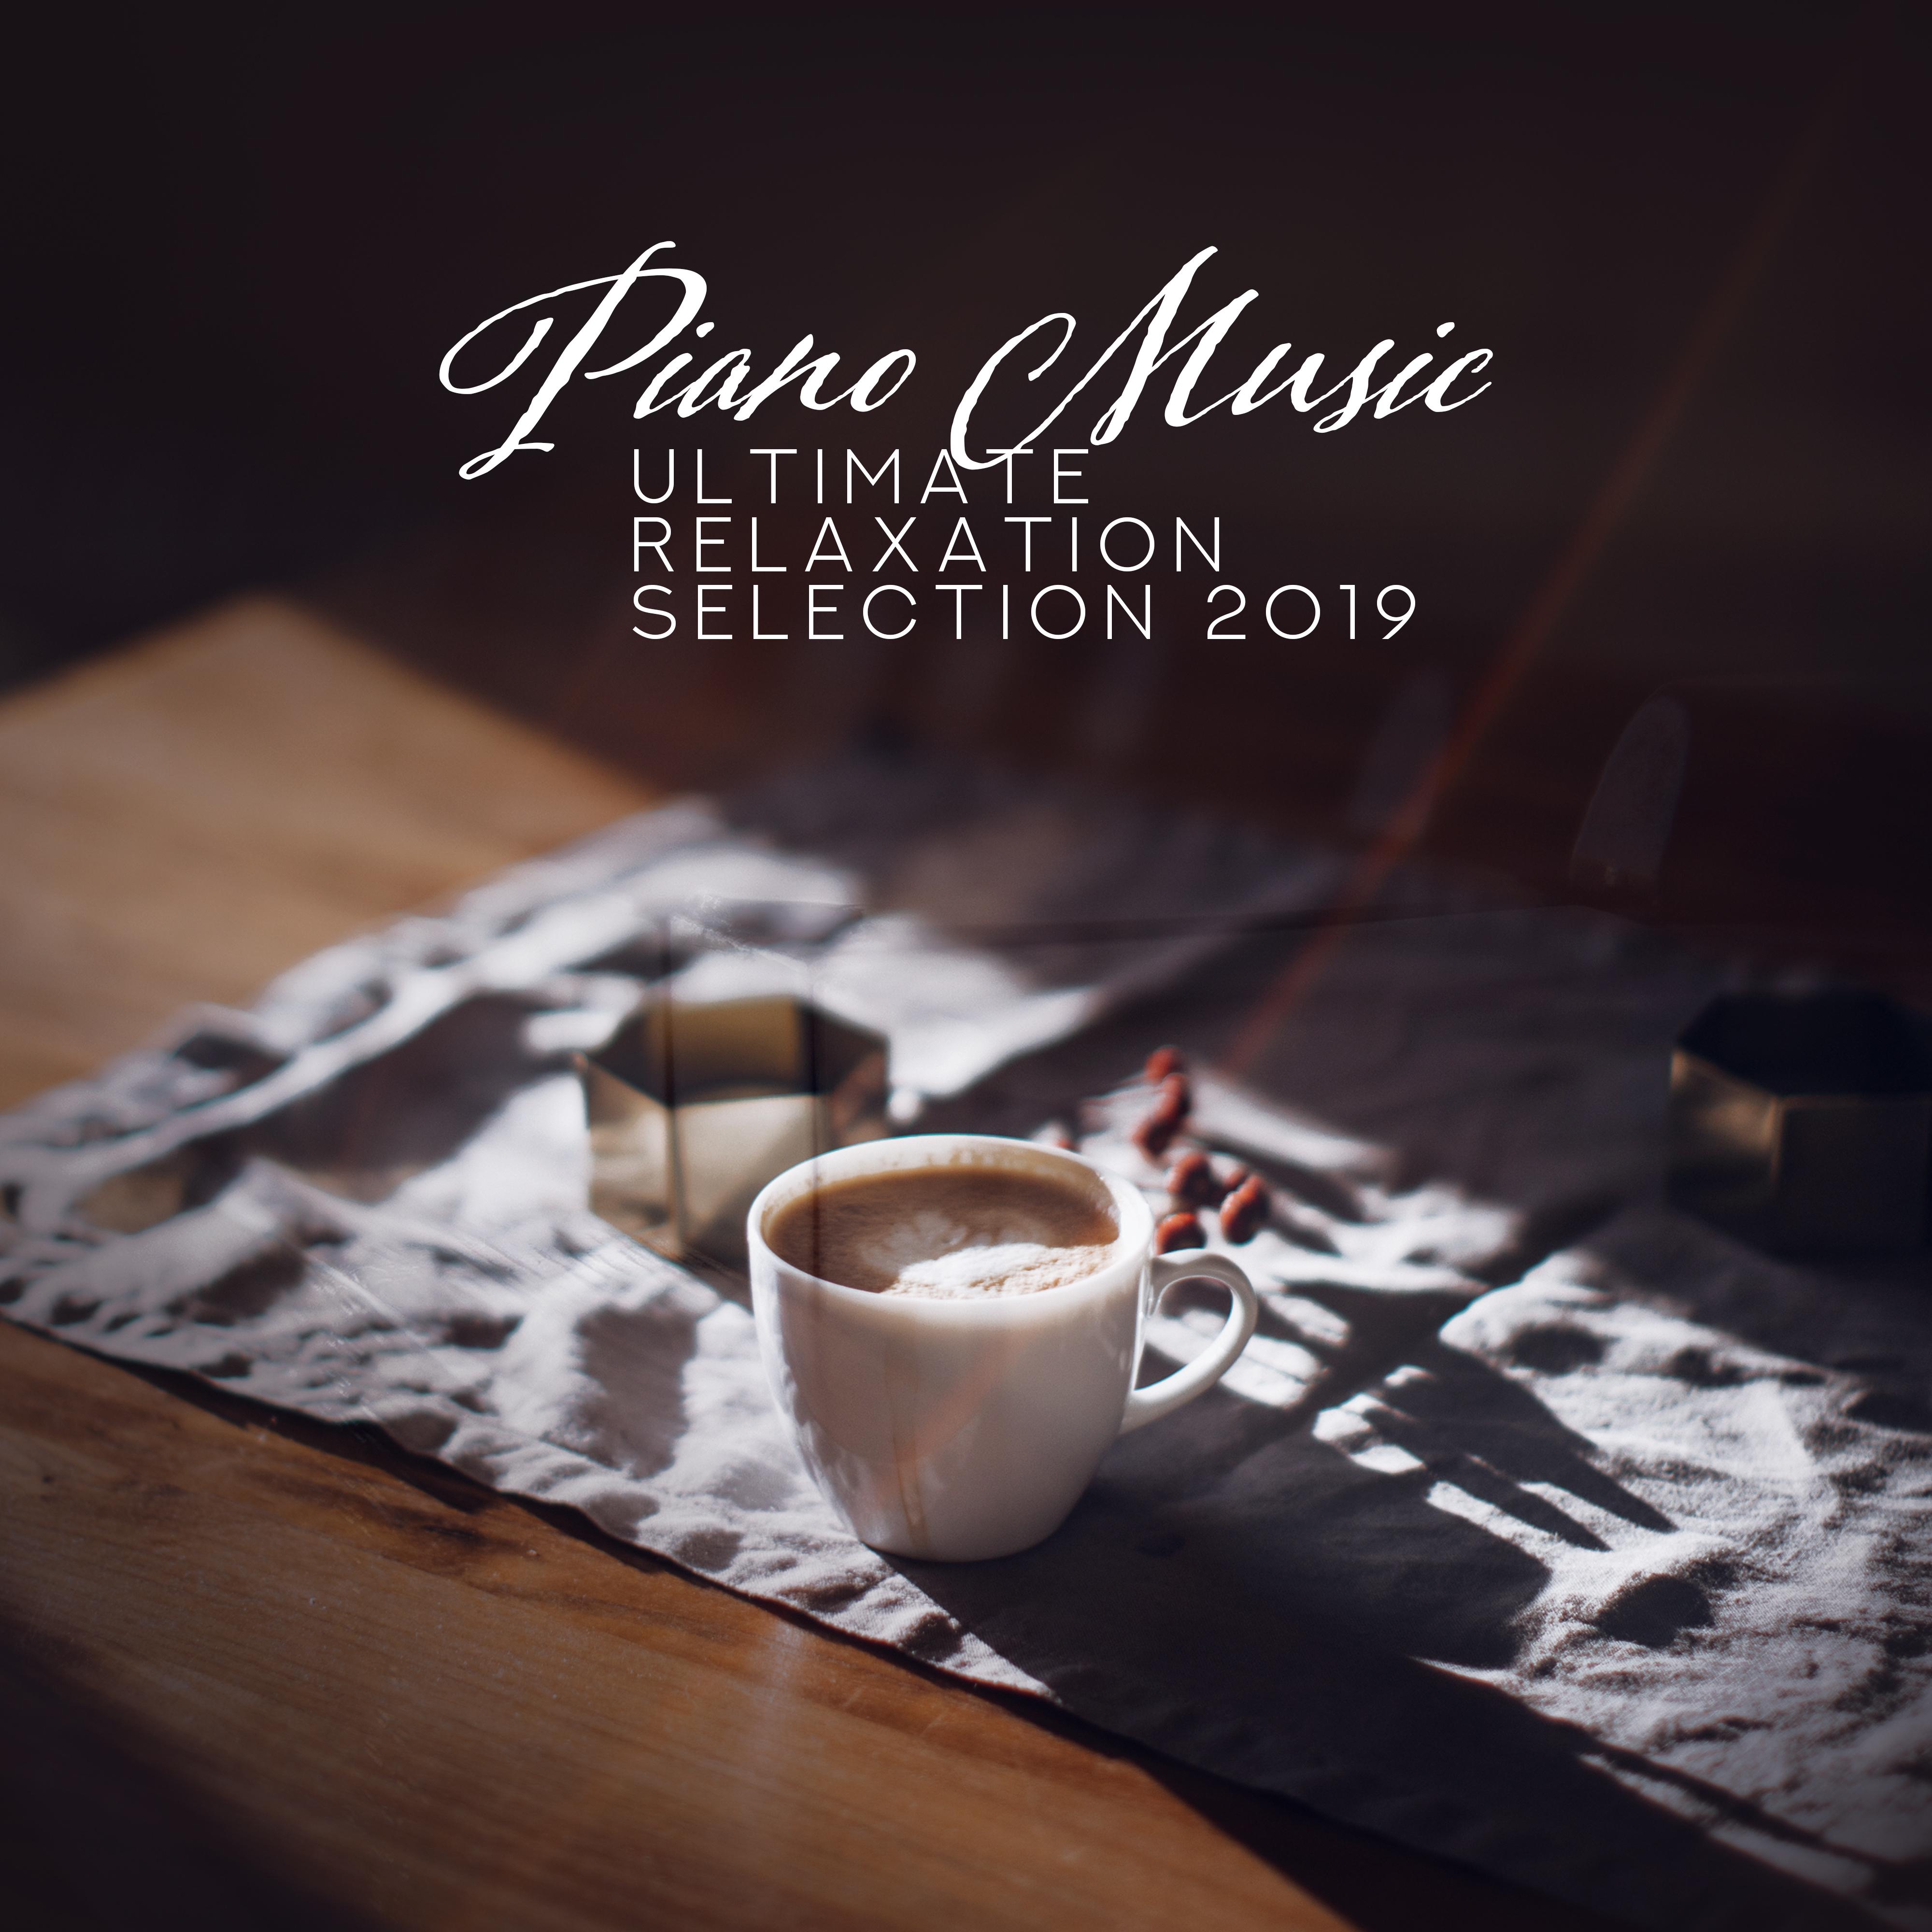 Piano Music Ultimate Relaxation Selection 2019